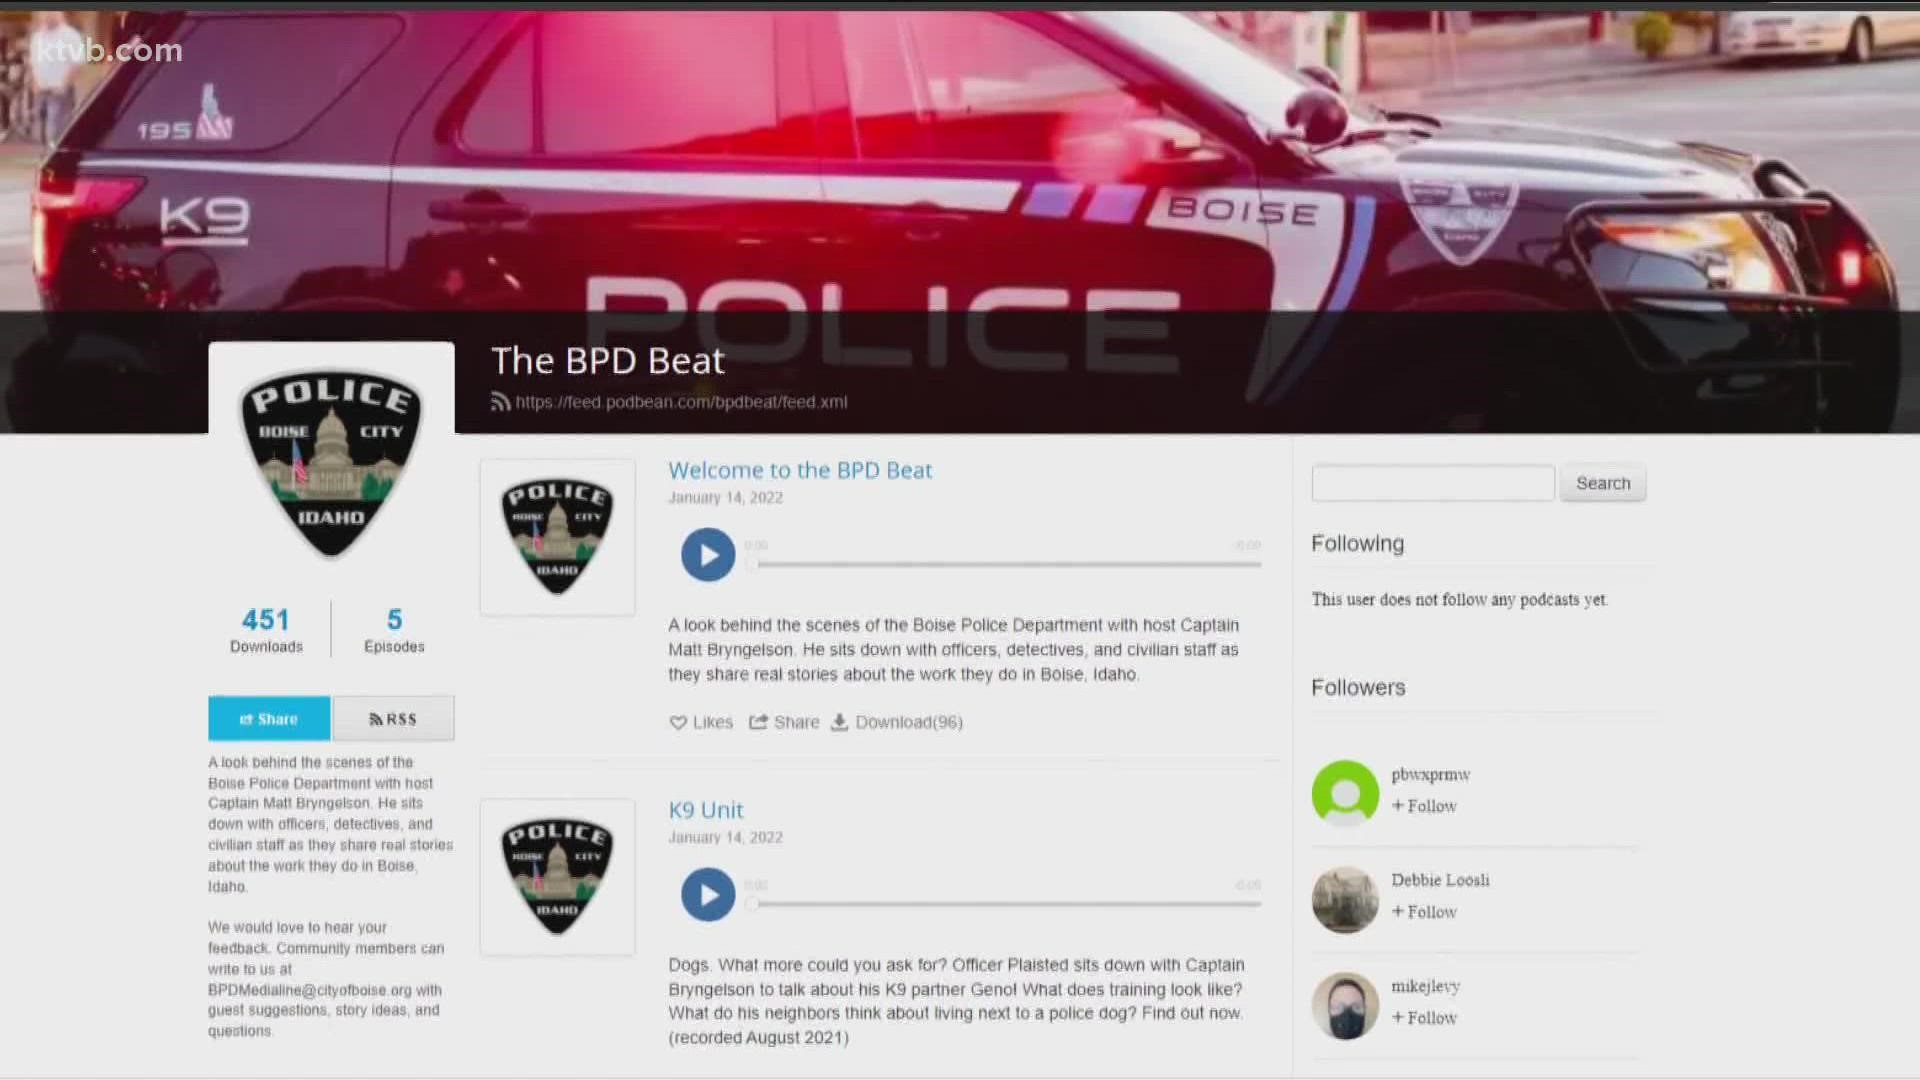 The podcast is called "The BPD Beat" and will cover a variety of topics with the goal of helping community members get to know department staff.